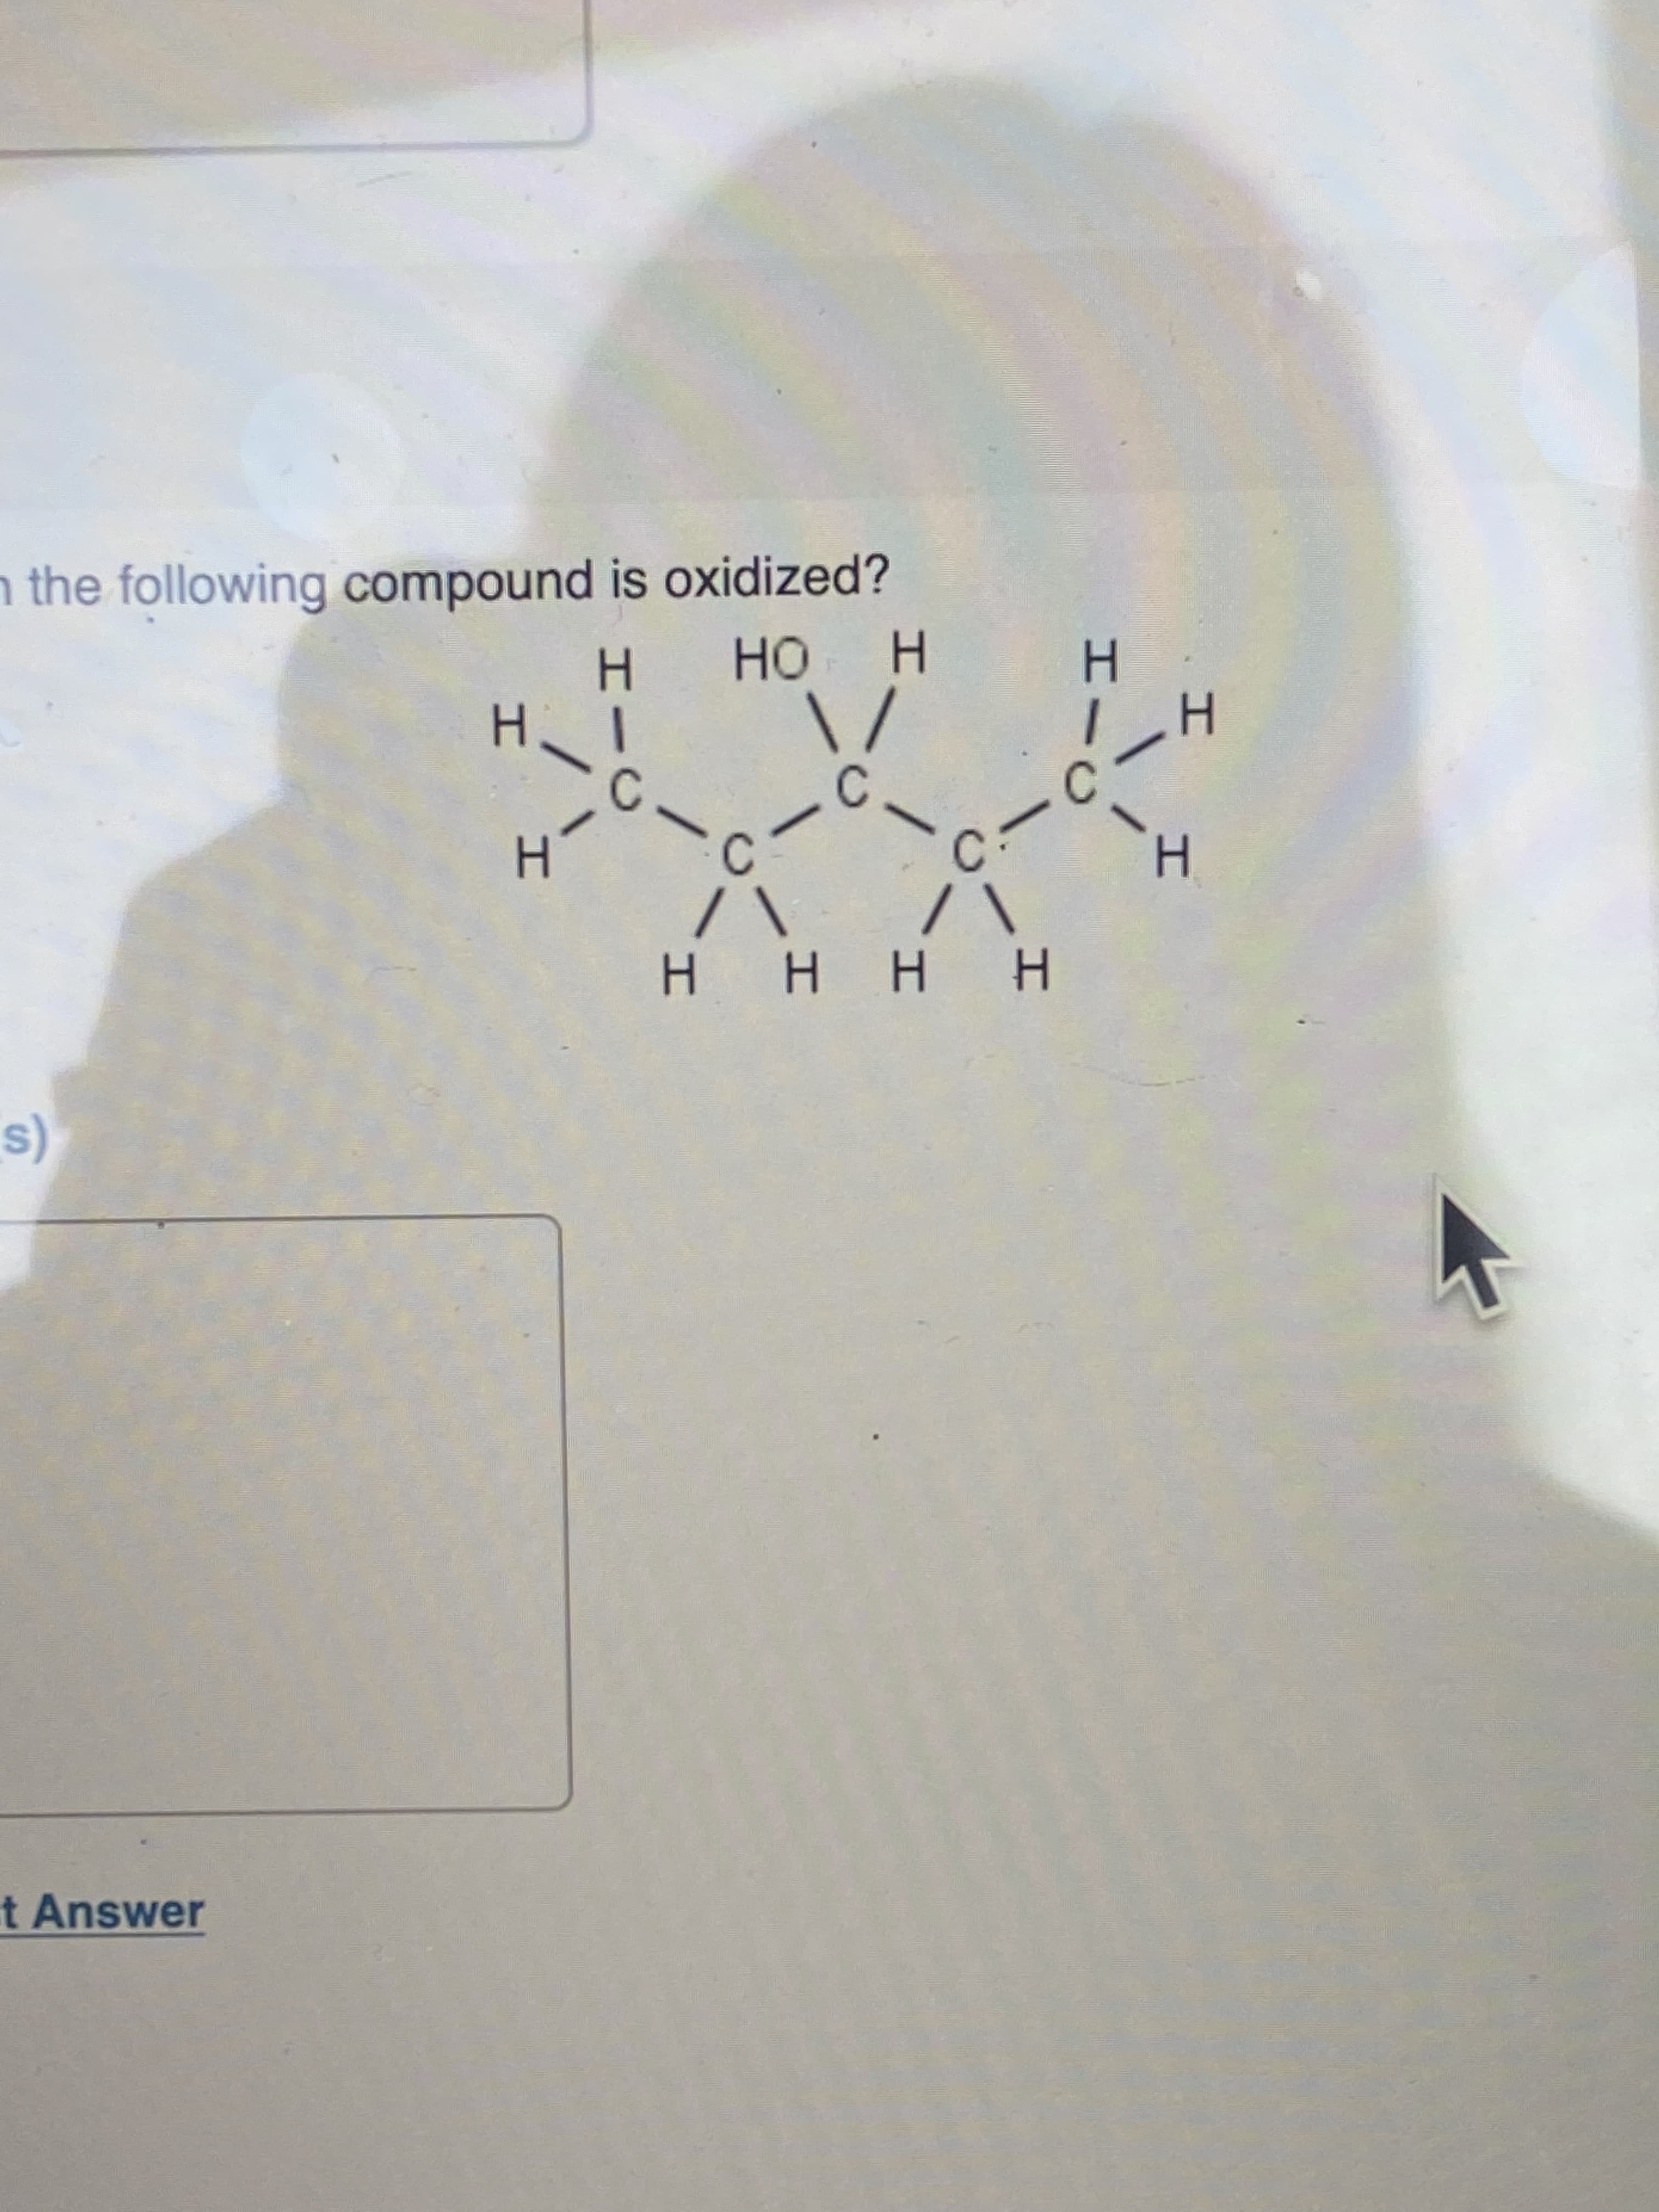 エ
C.
HIC
t Answer
(s
H H HH
H.
C.
H.
C.
C
H.
H HO H
n the following compound is oxidized?
